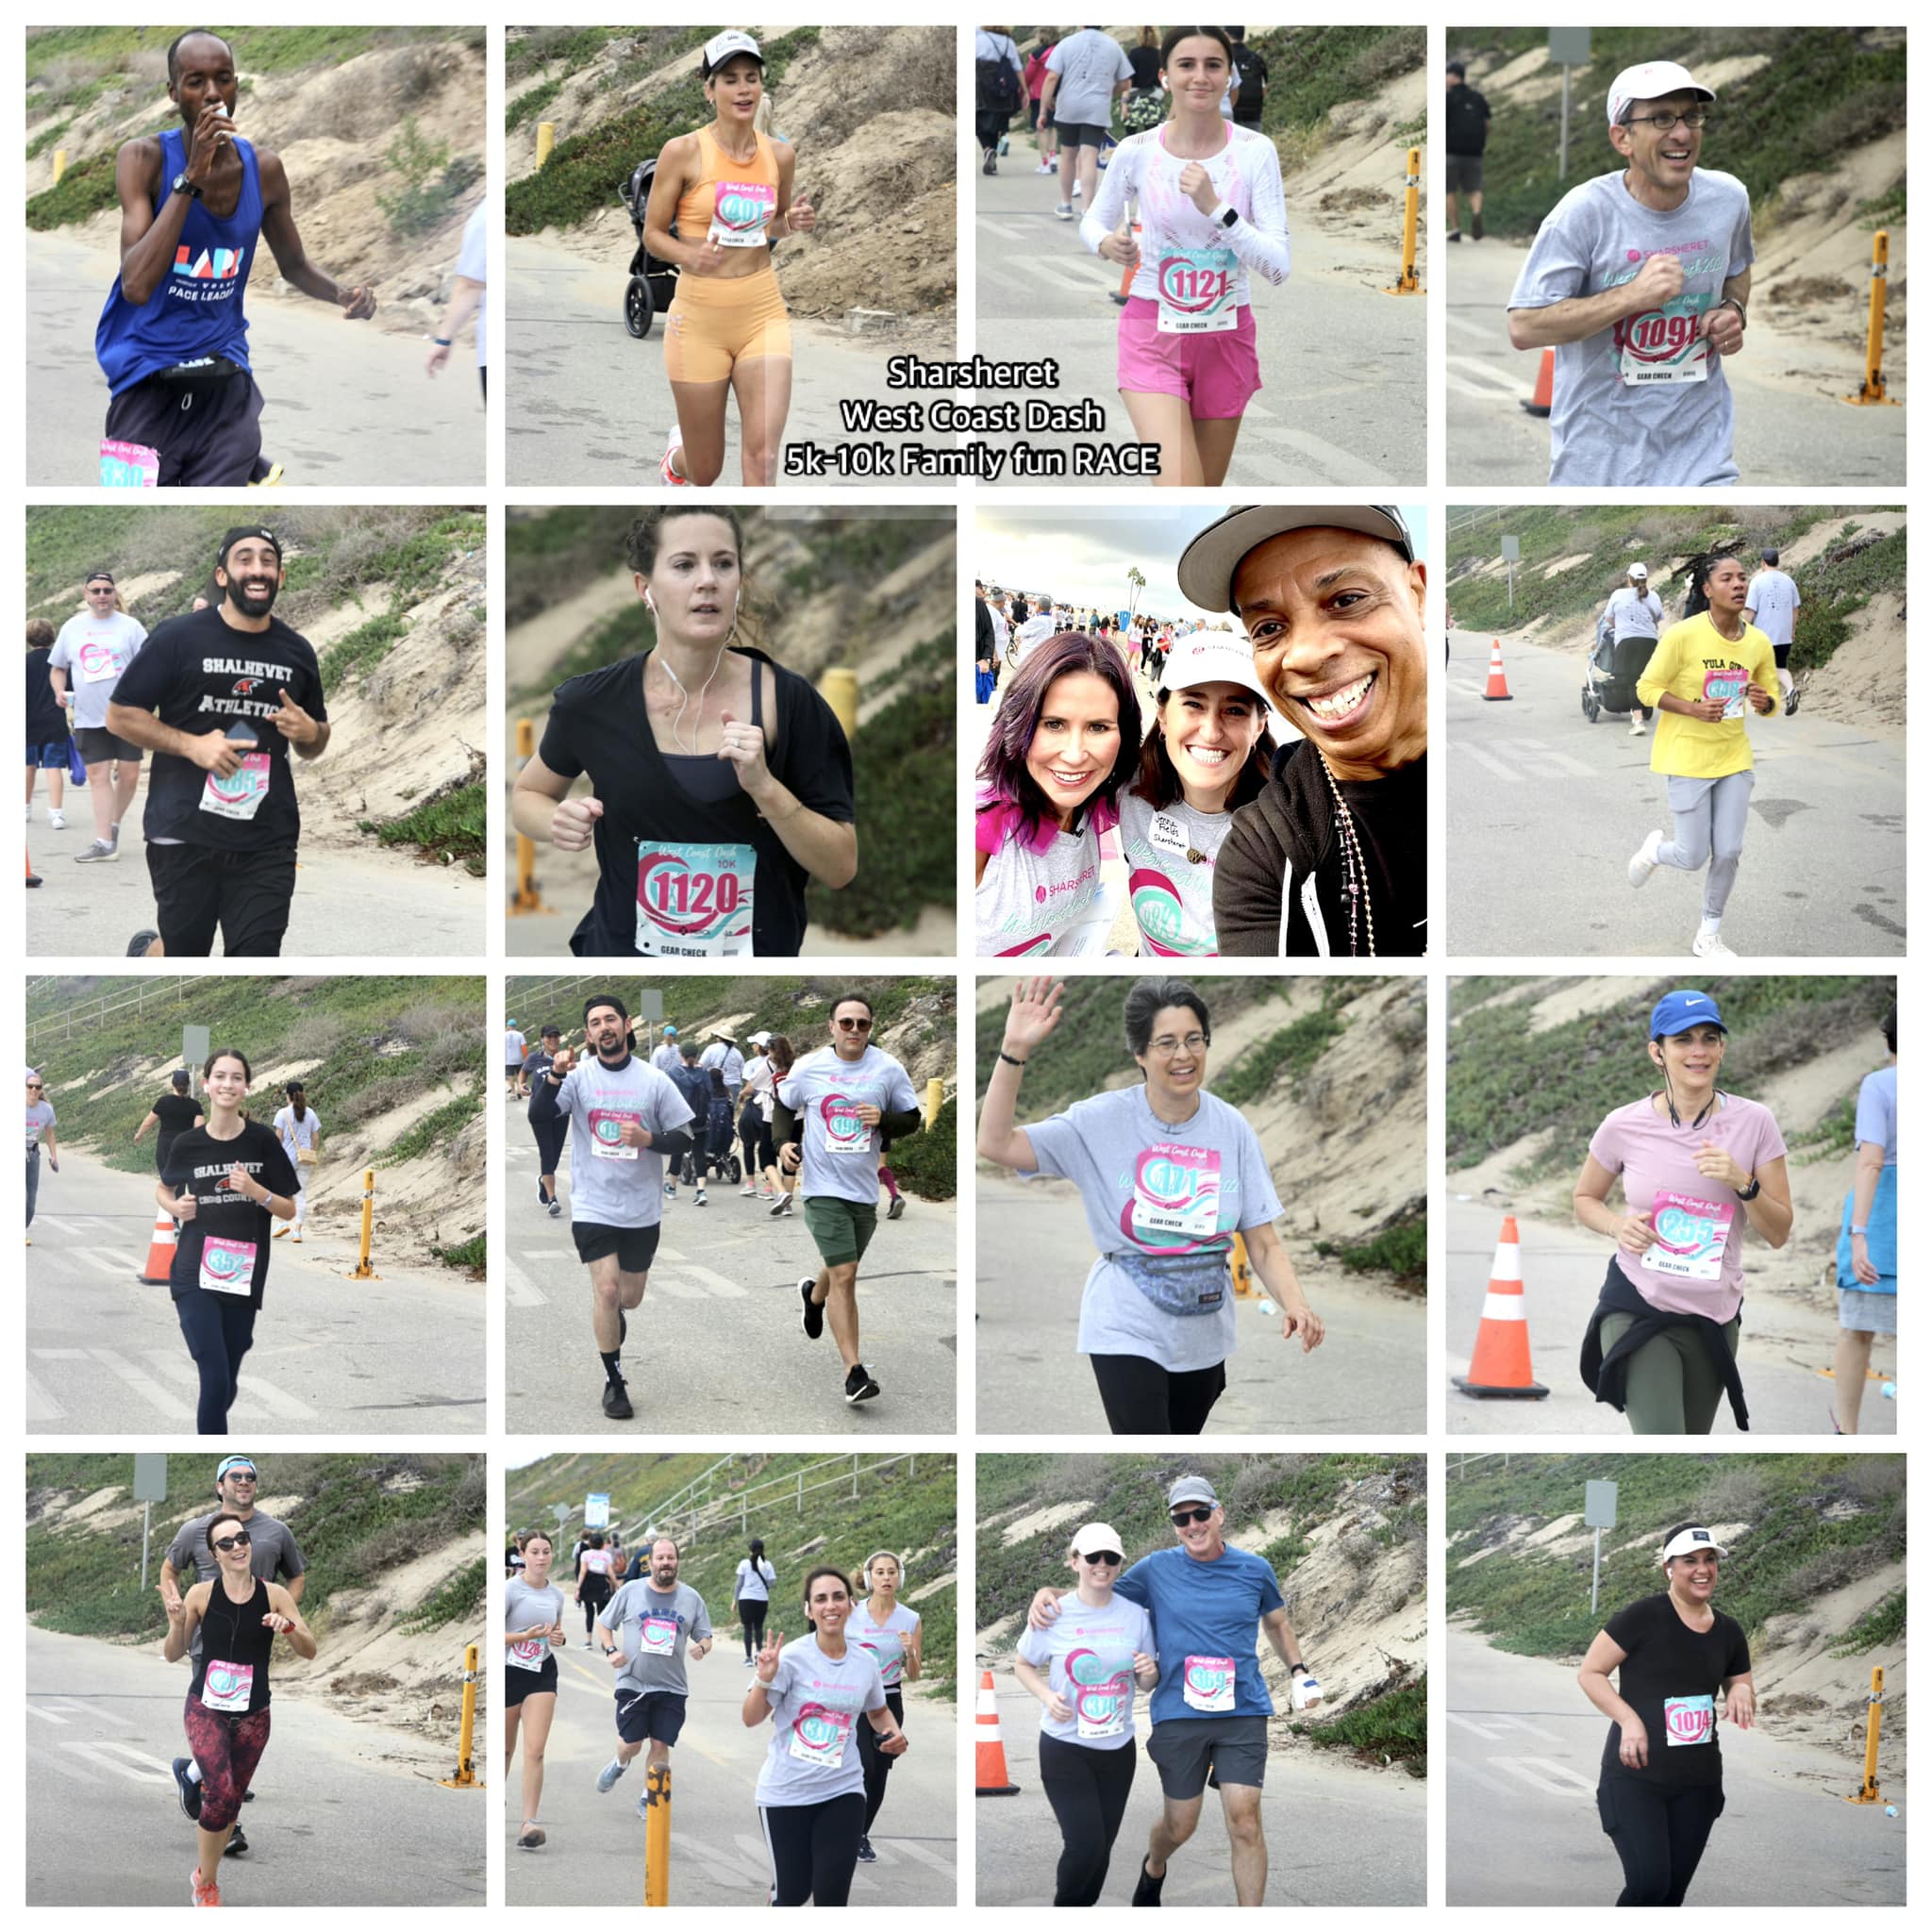 The Charity Fitness Tour rolled to The Sharsheret West Coast Dash 5k-10k & Family fun Race.